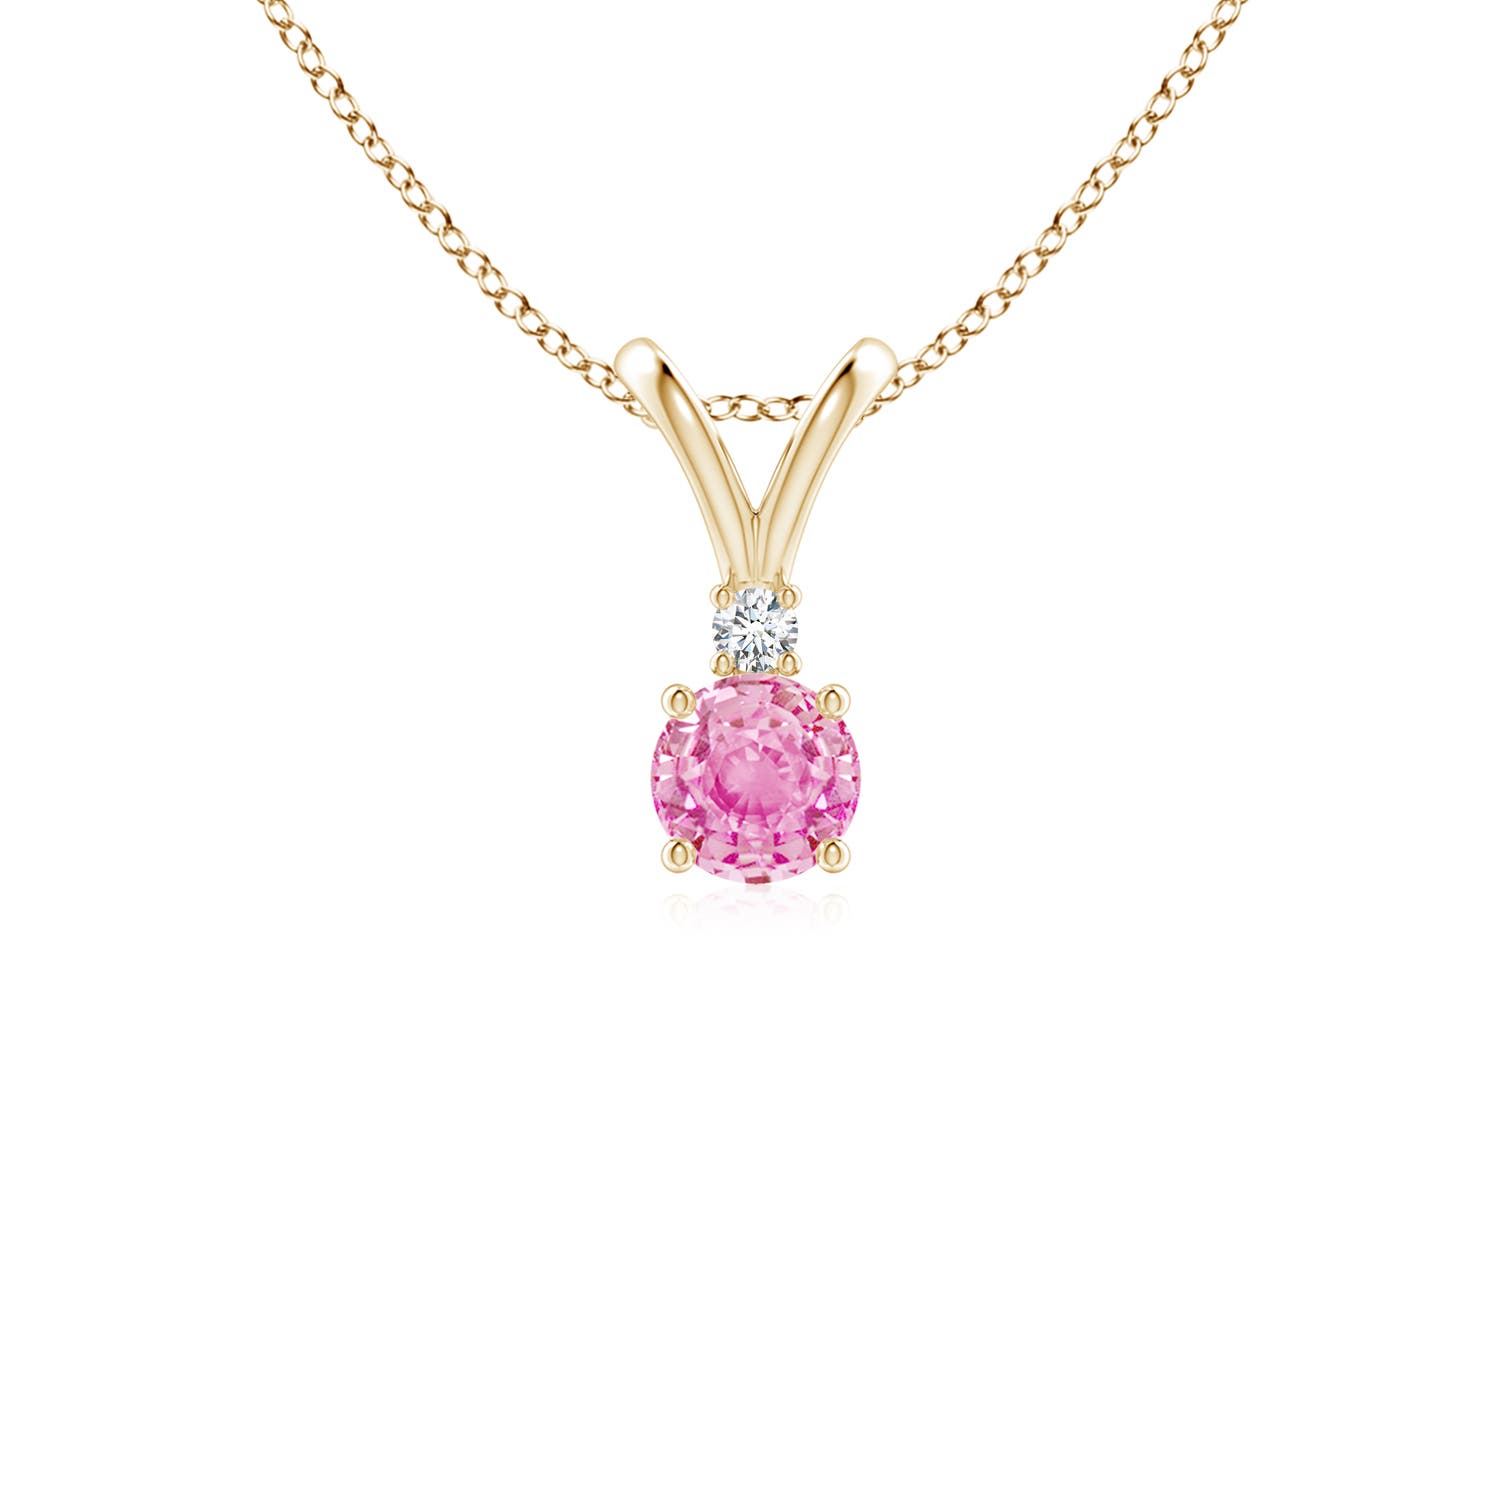 A - Pink Sapphire / 0.34 CT / 14 KT Yellow Gold